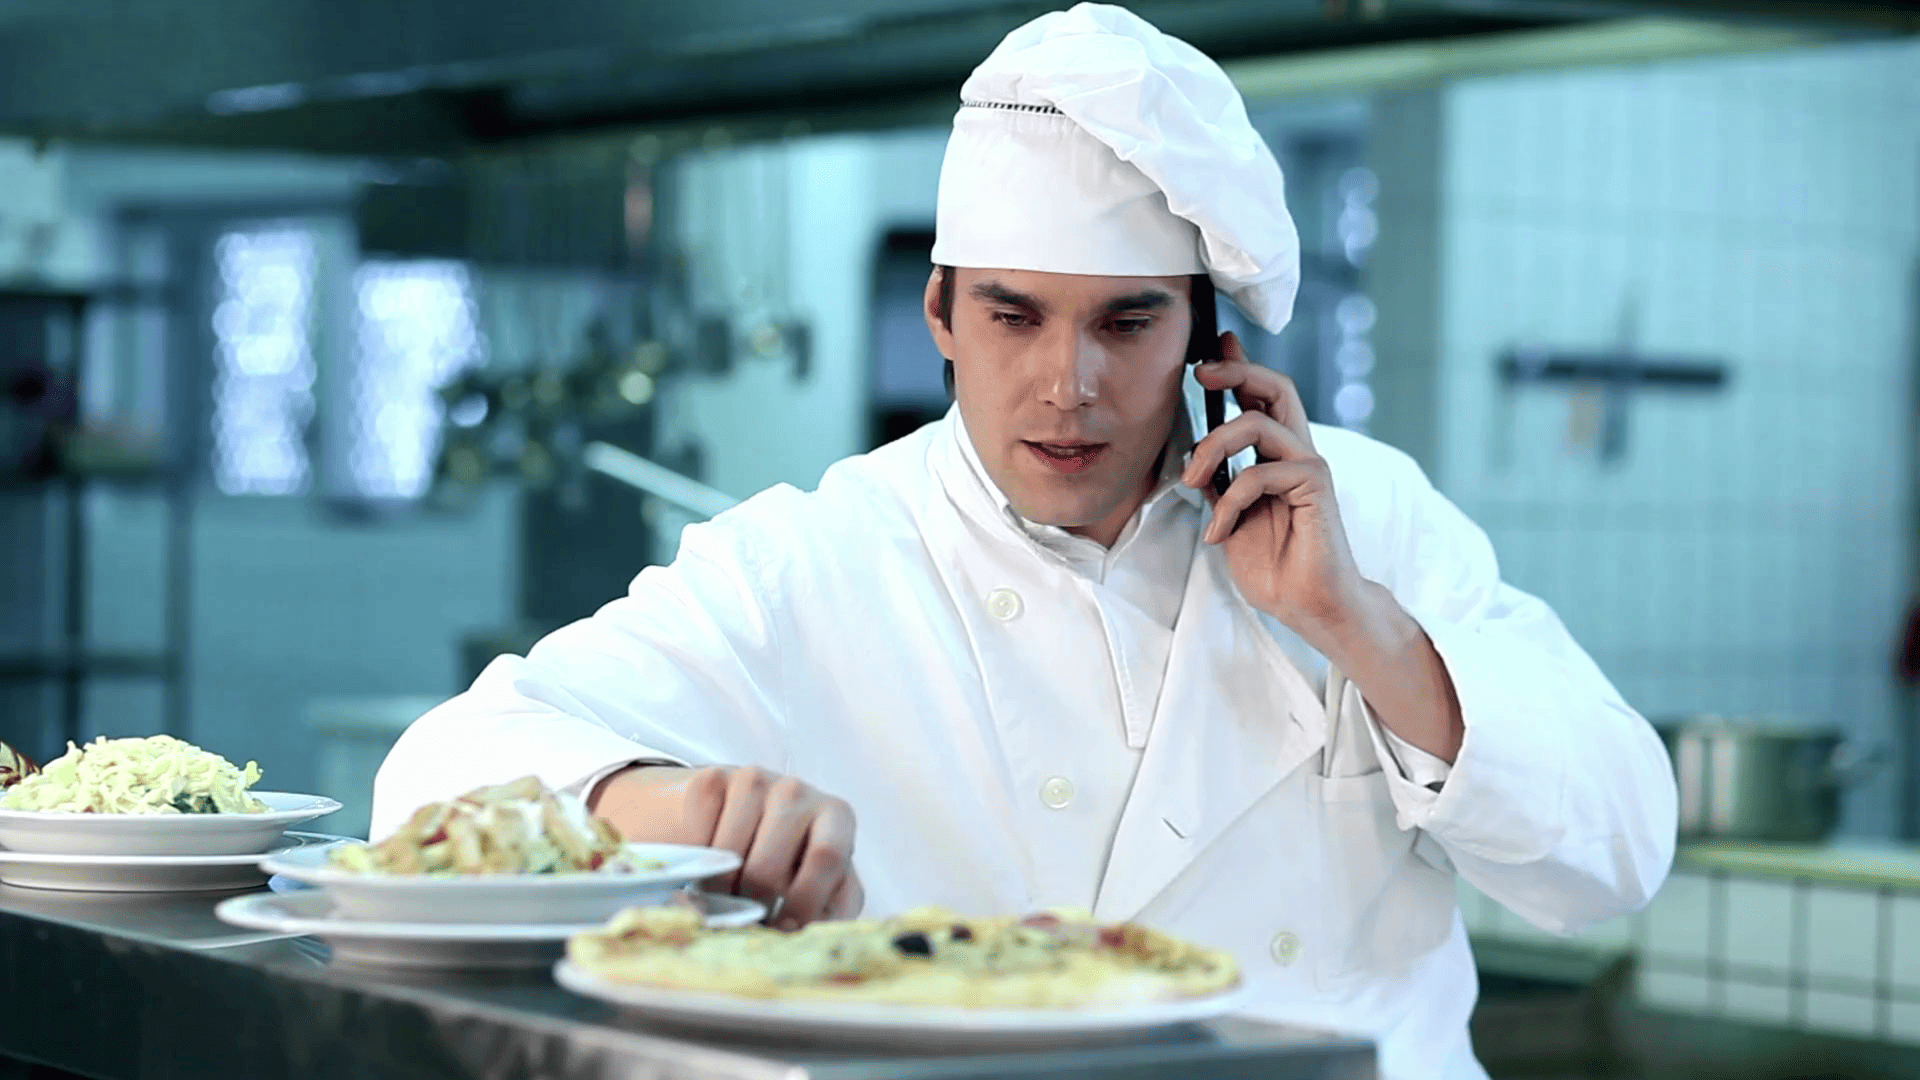 3 Facts About Restaurant Phone Calls That Seem Obvious But Aren’t